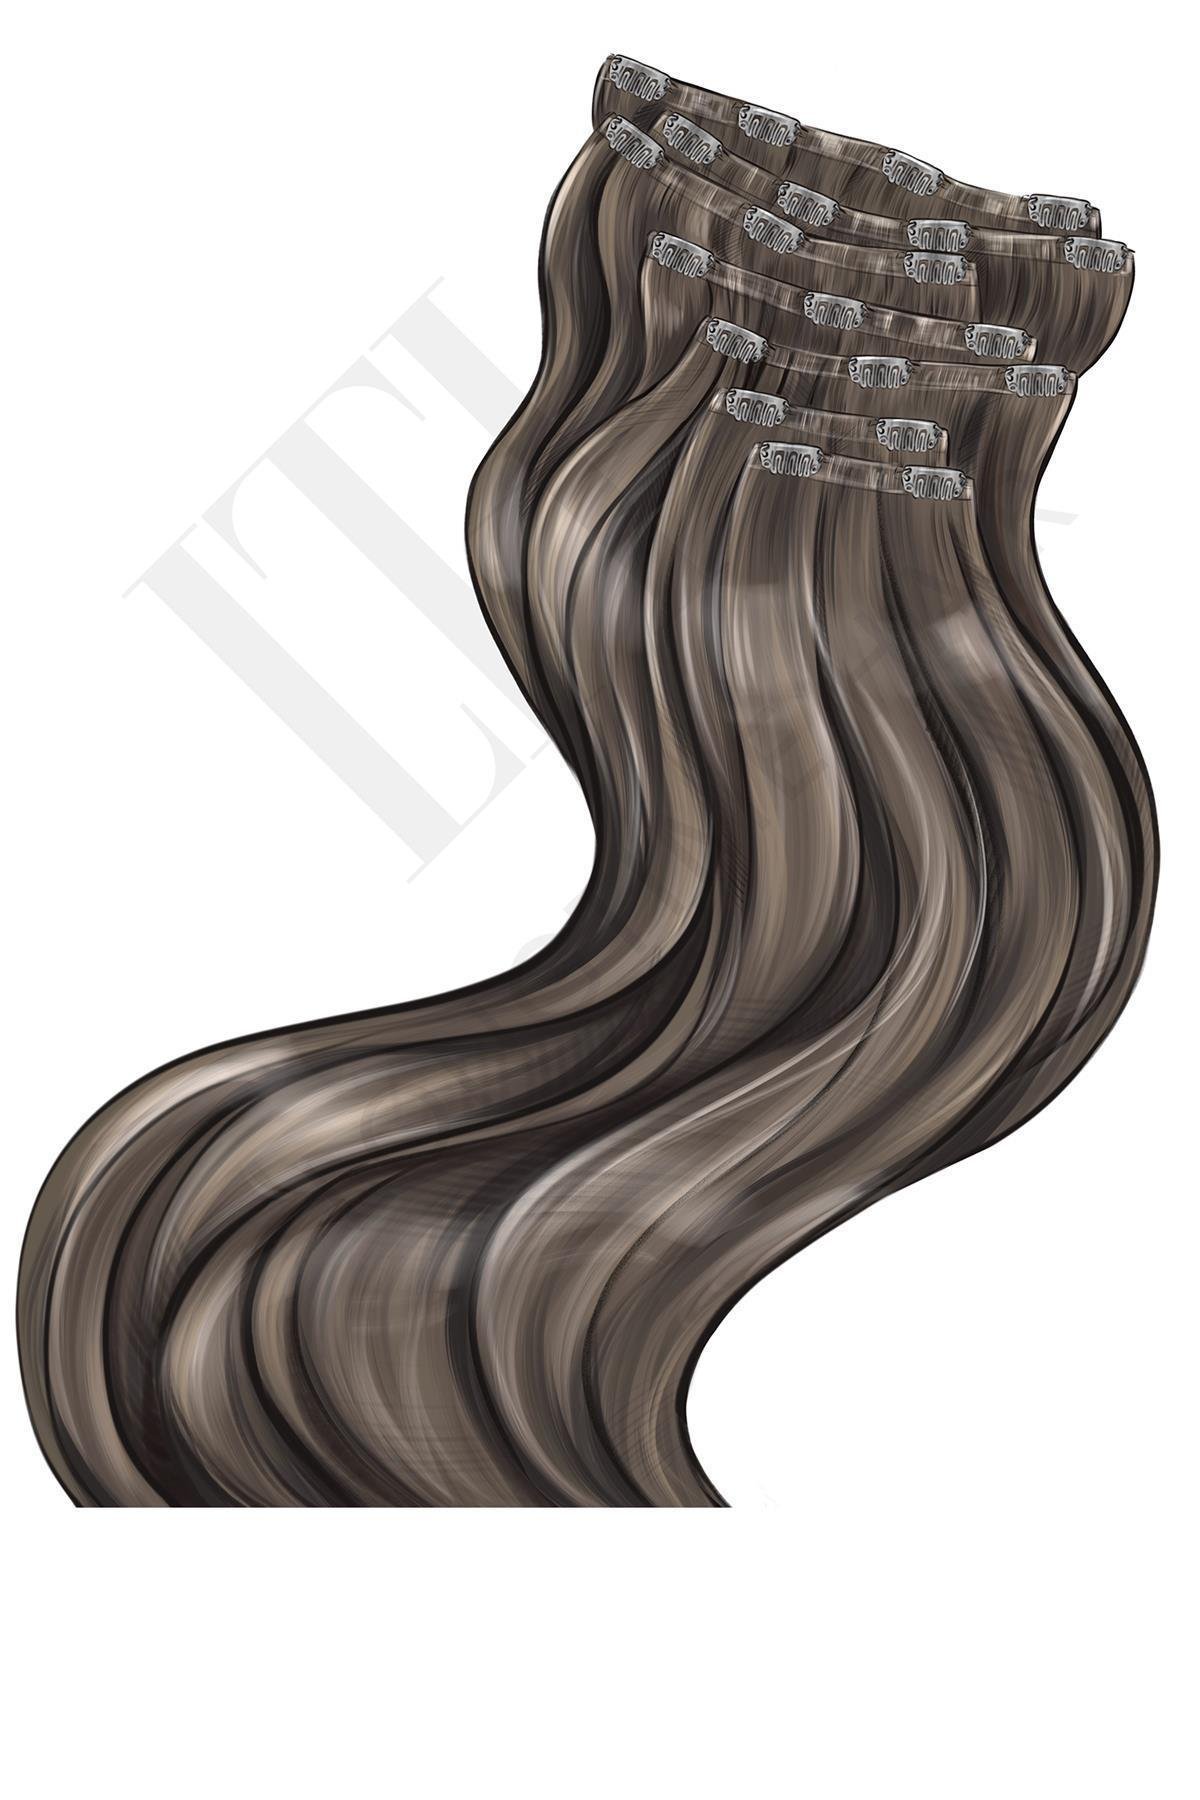 Human Hair Seamless Clip In Extensions - 130g l LONGTIME HAIR - Real hair  extensions, clip, 159,00 €